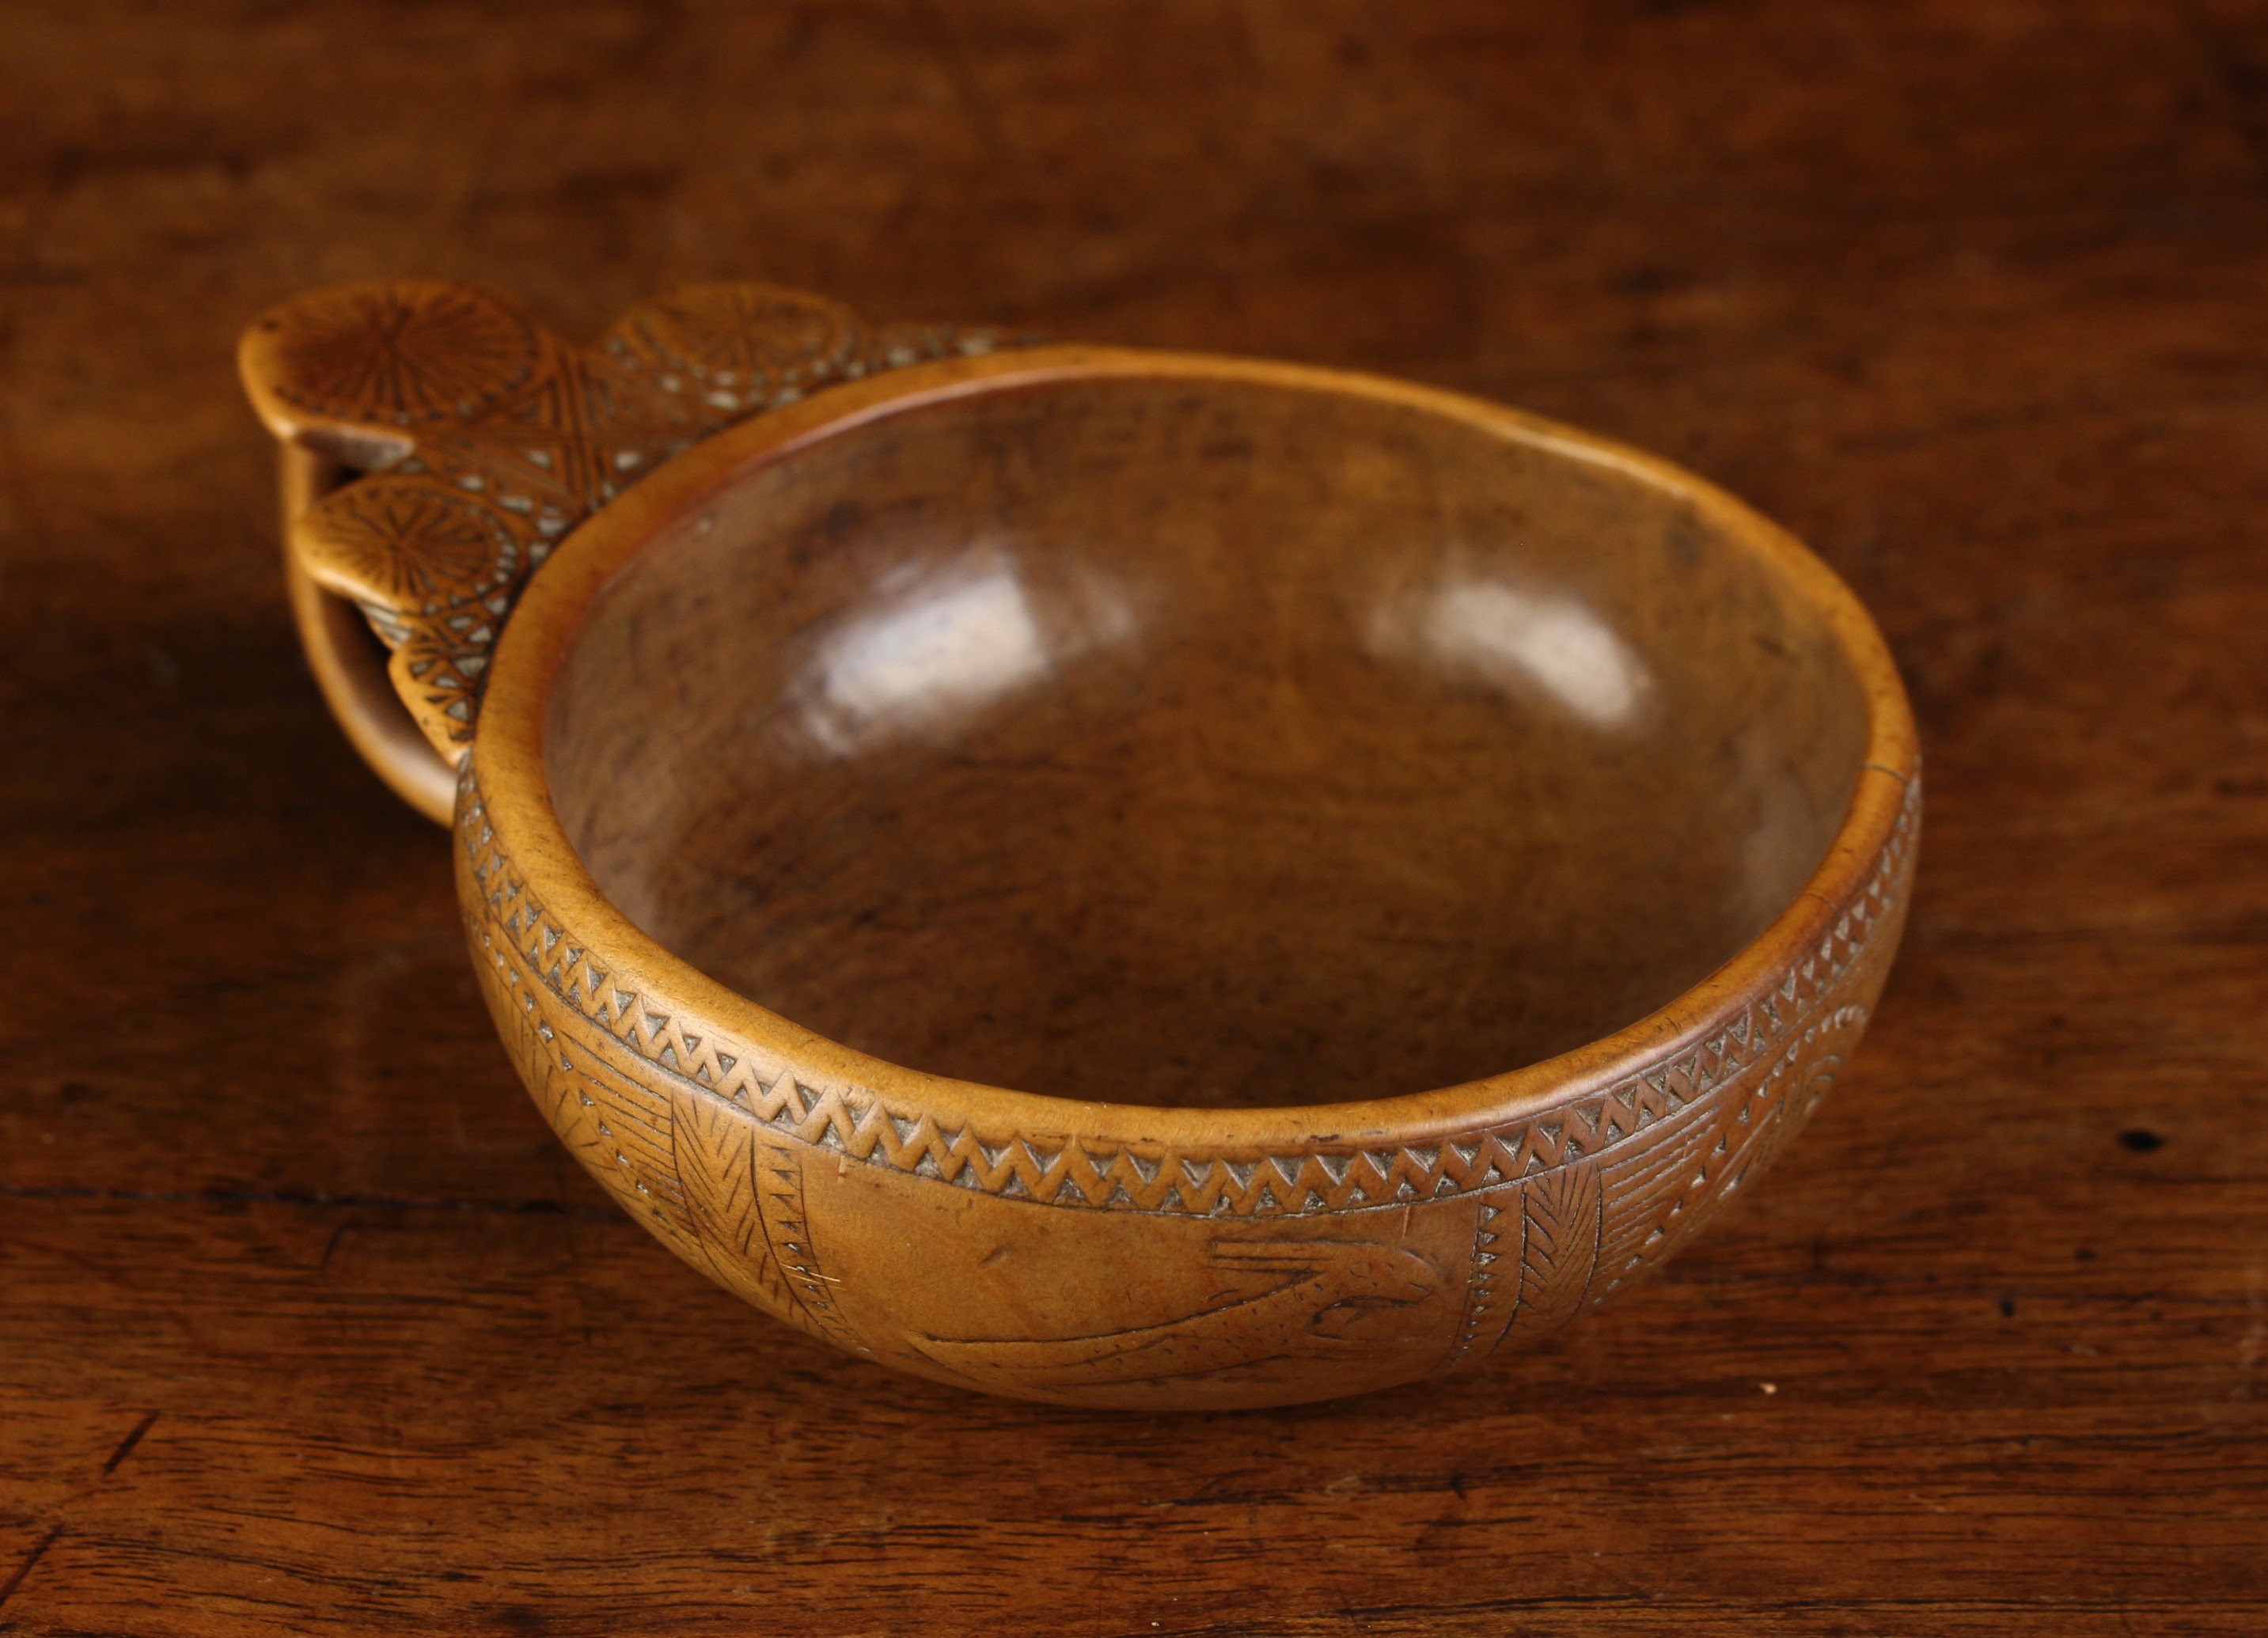 A Fine & Rare 16th/17th Century Boxwood Porringer or Tasting Cup of rich colour and patination.